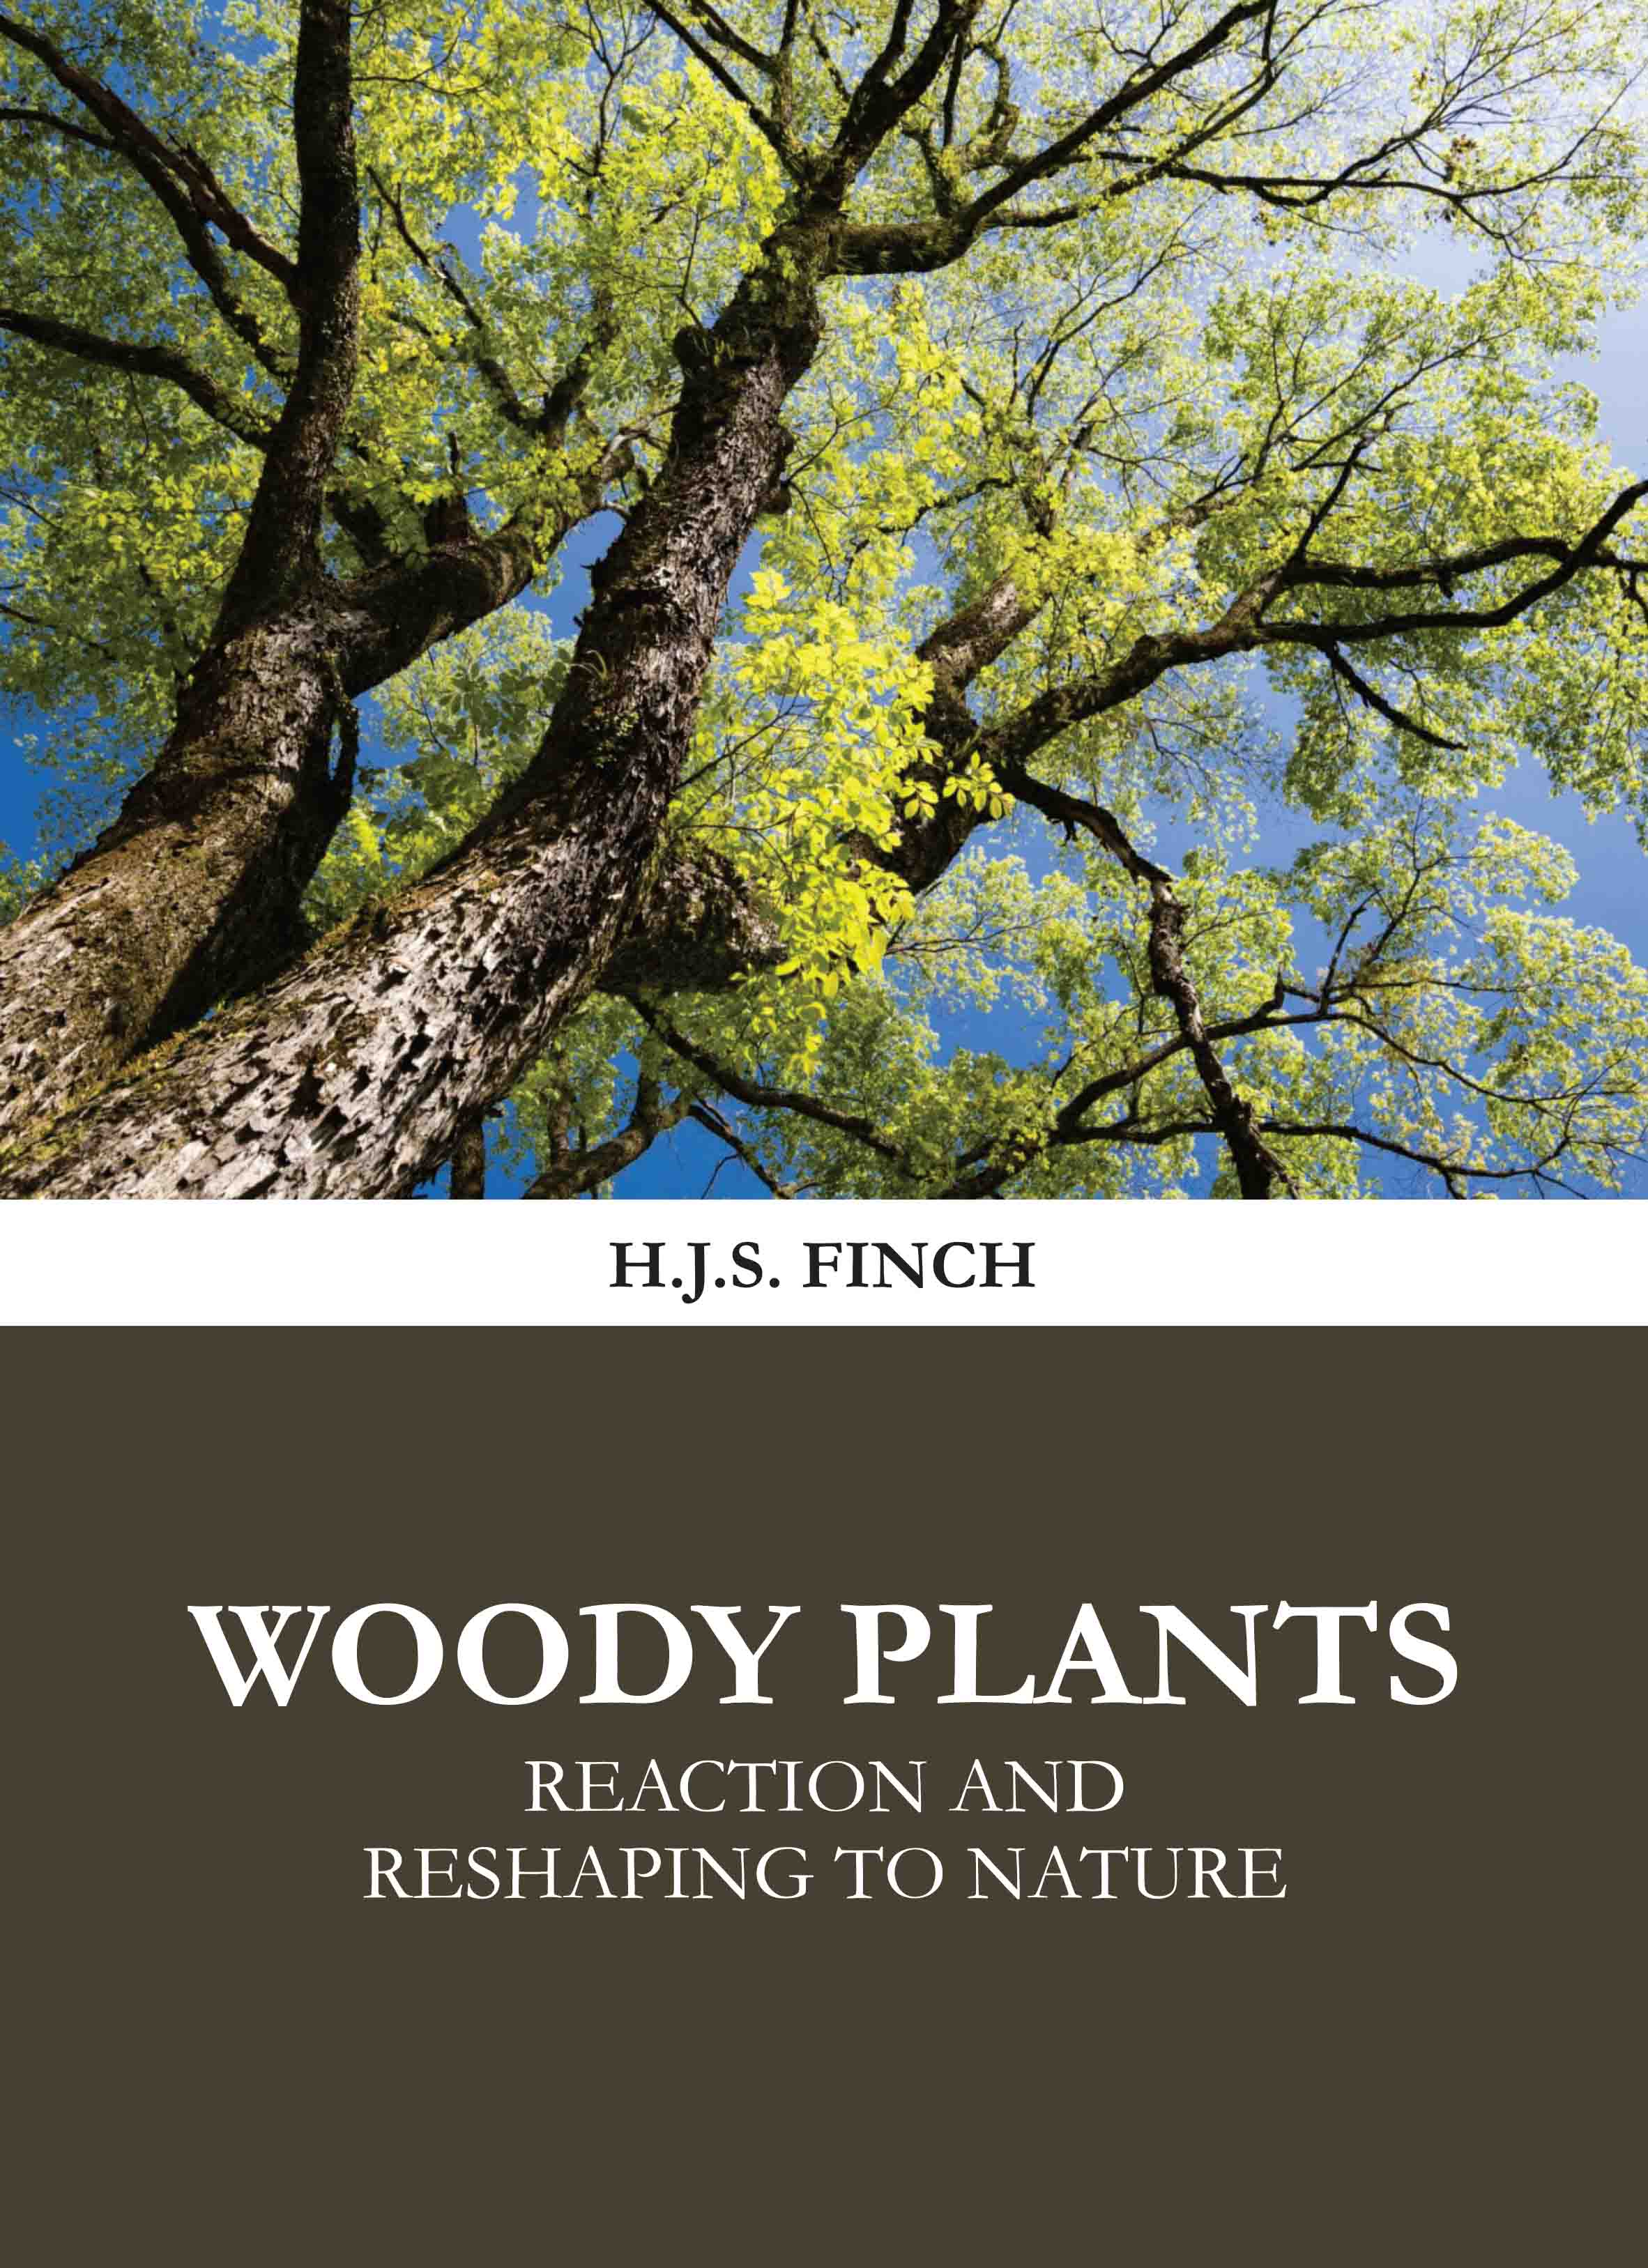 Woody Plants: Reaction and Reshaping to Nature